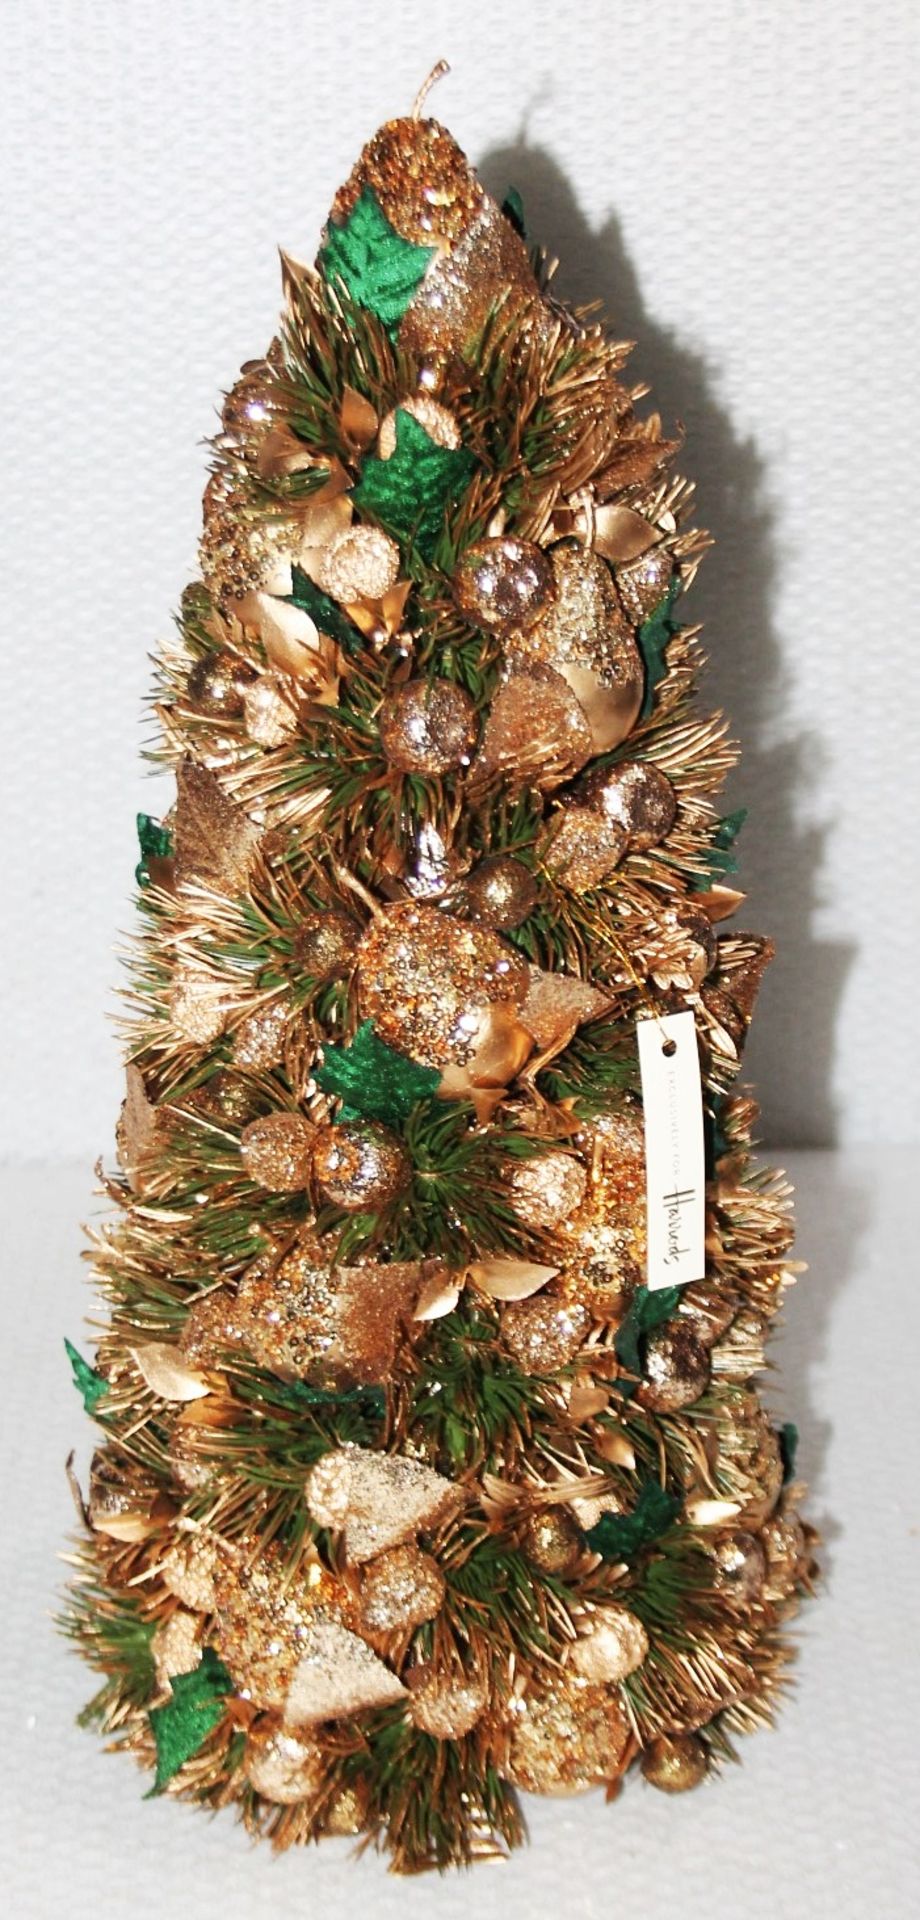 1 x SALZBURG CREATIONS Decorative 'Pear Tree' Ornament In Gold & Green - 18 Inches Tall - Original - Image 4 of 7